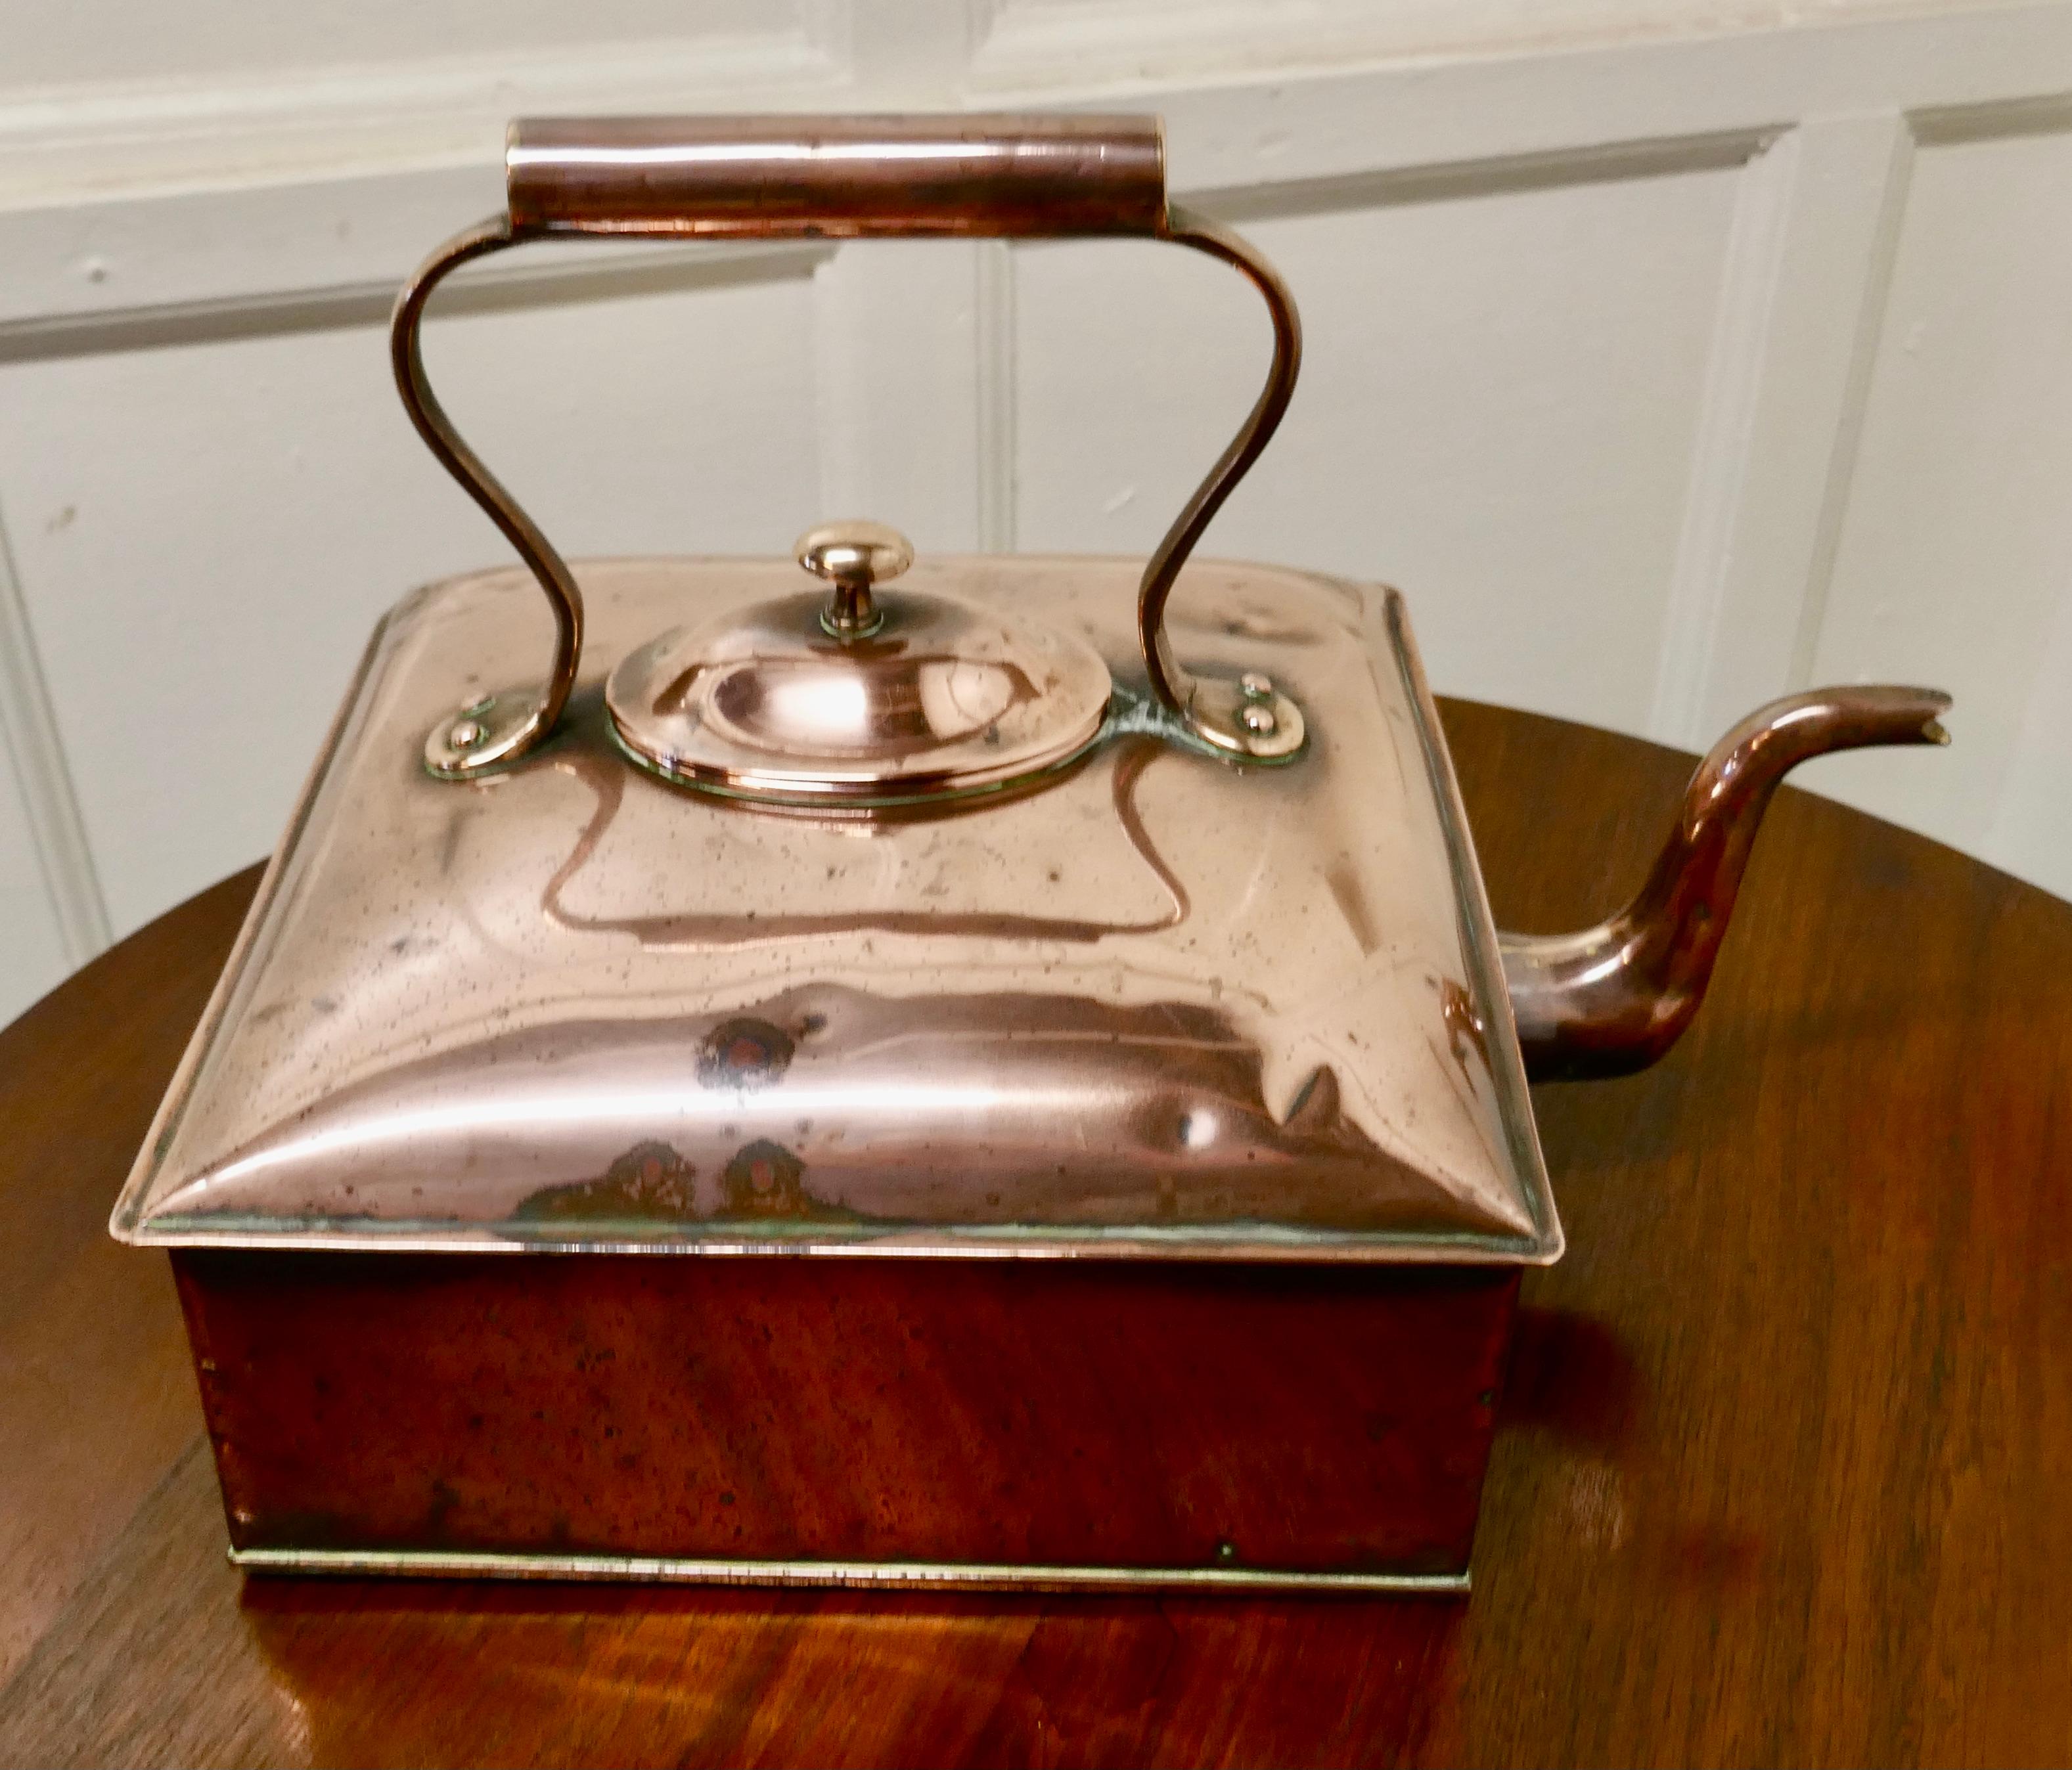 Country Charming 19th Century Large Square Copper Kettle For Sale